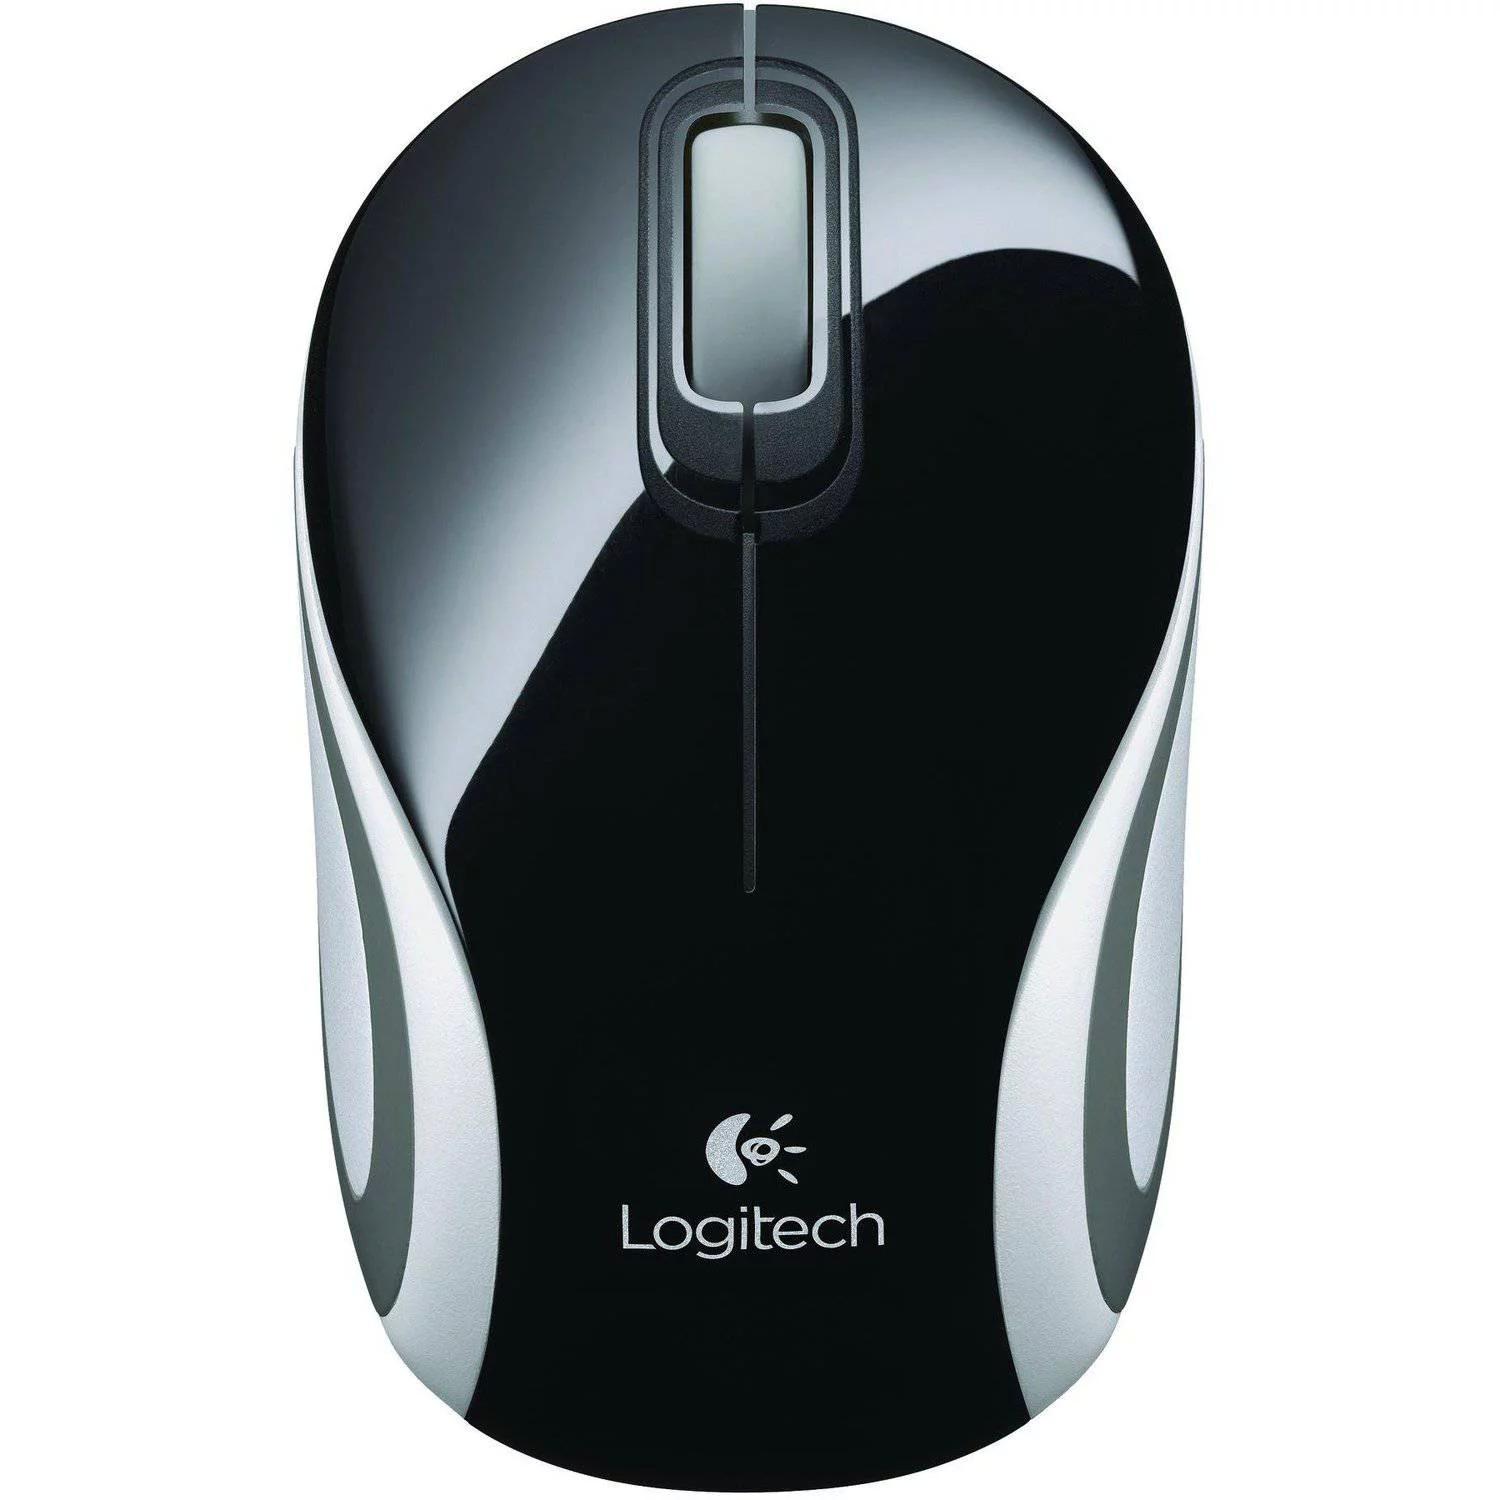 Logitech M187 Wireless Optical Mouse for $7.99 Shipped